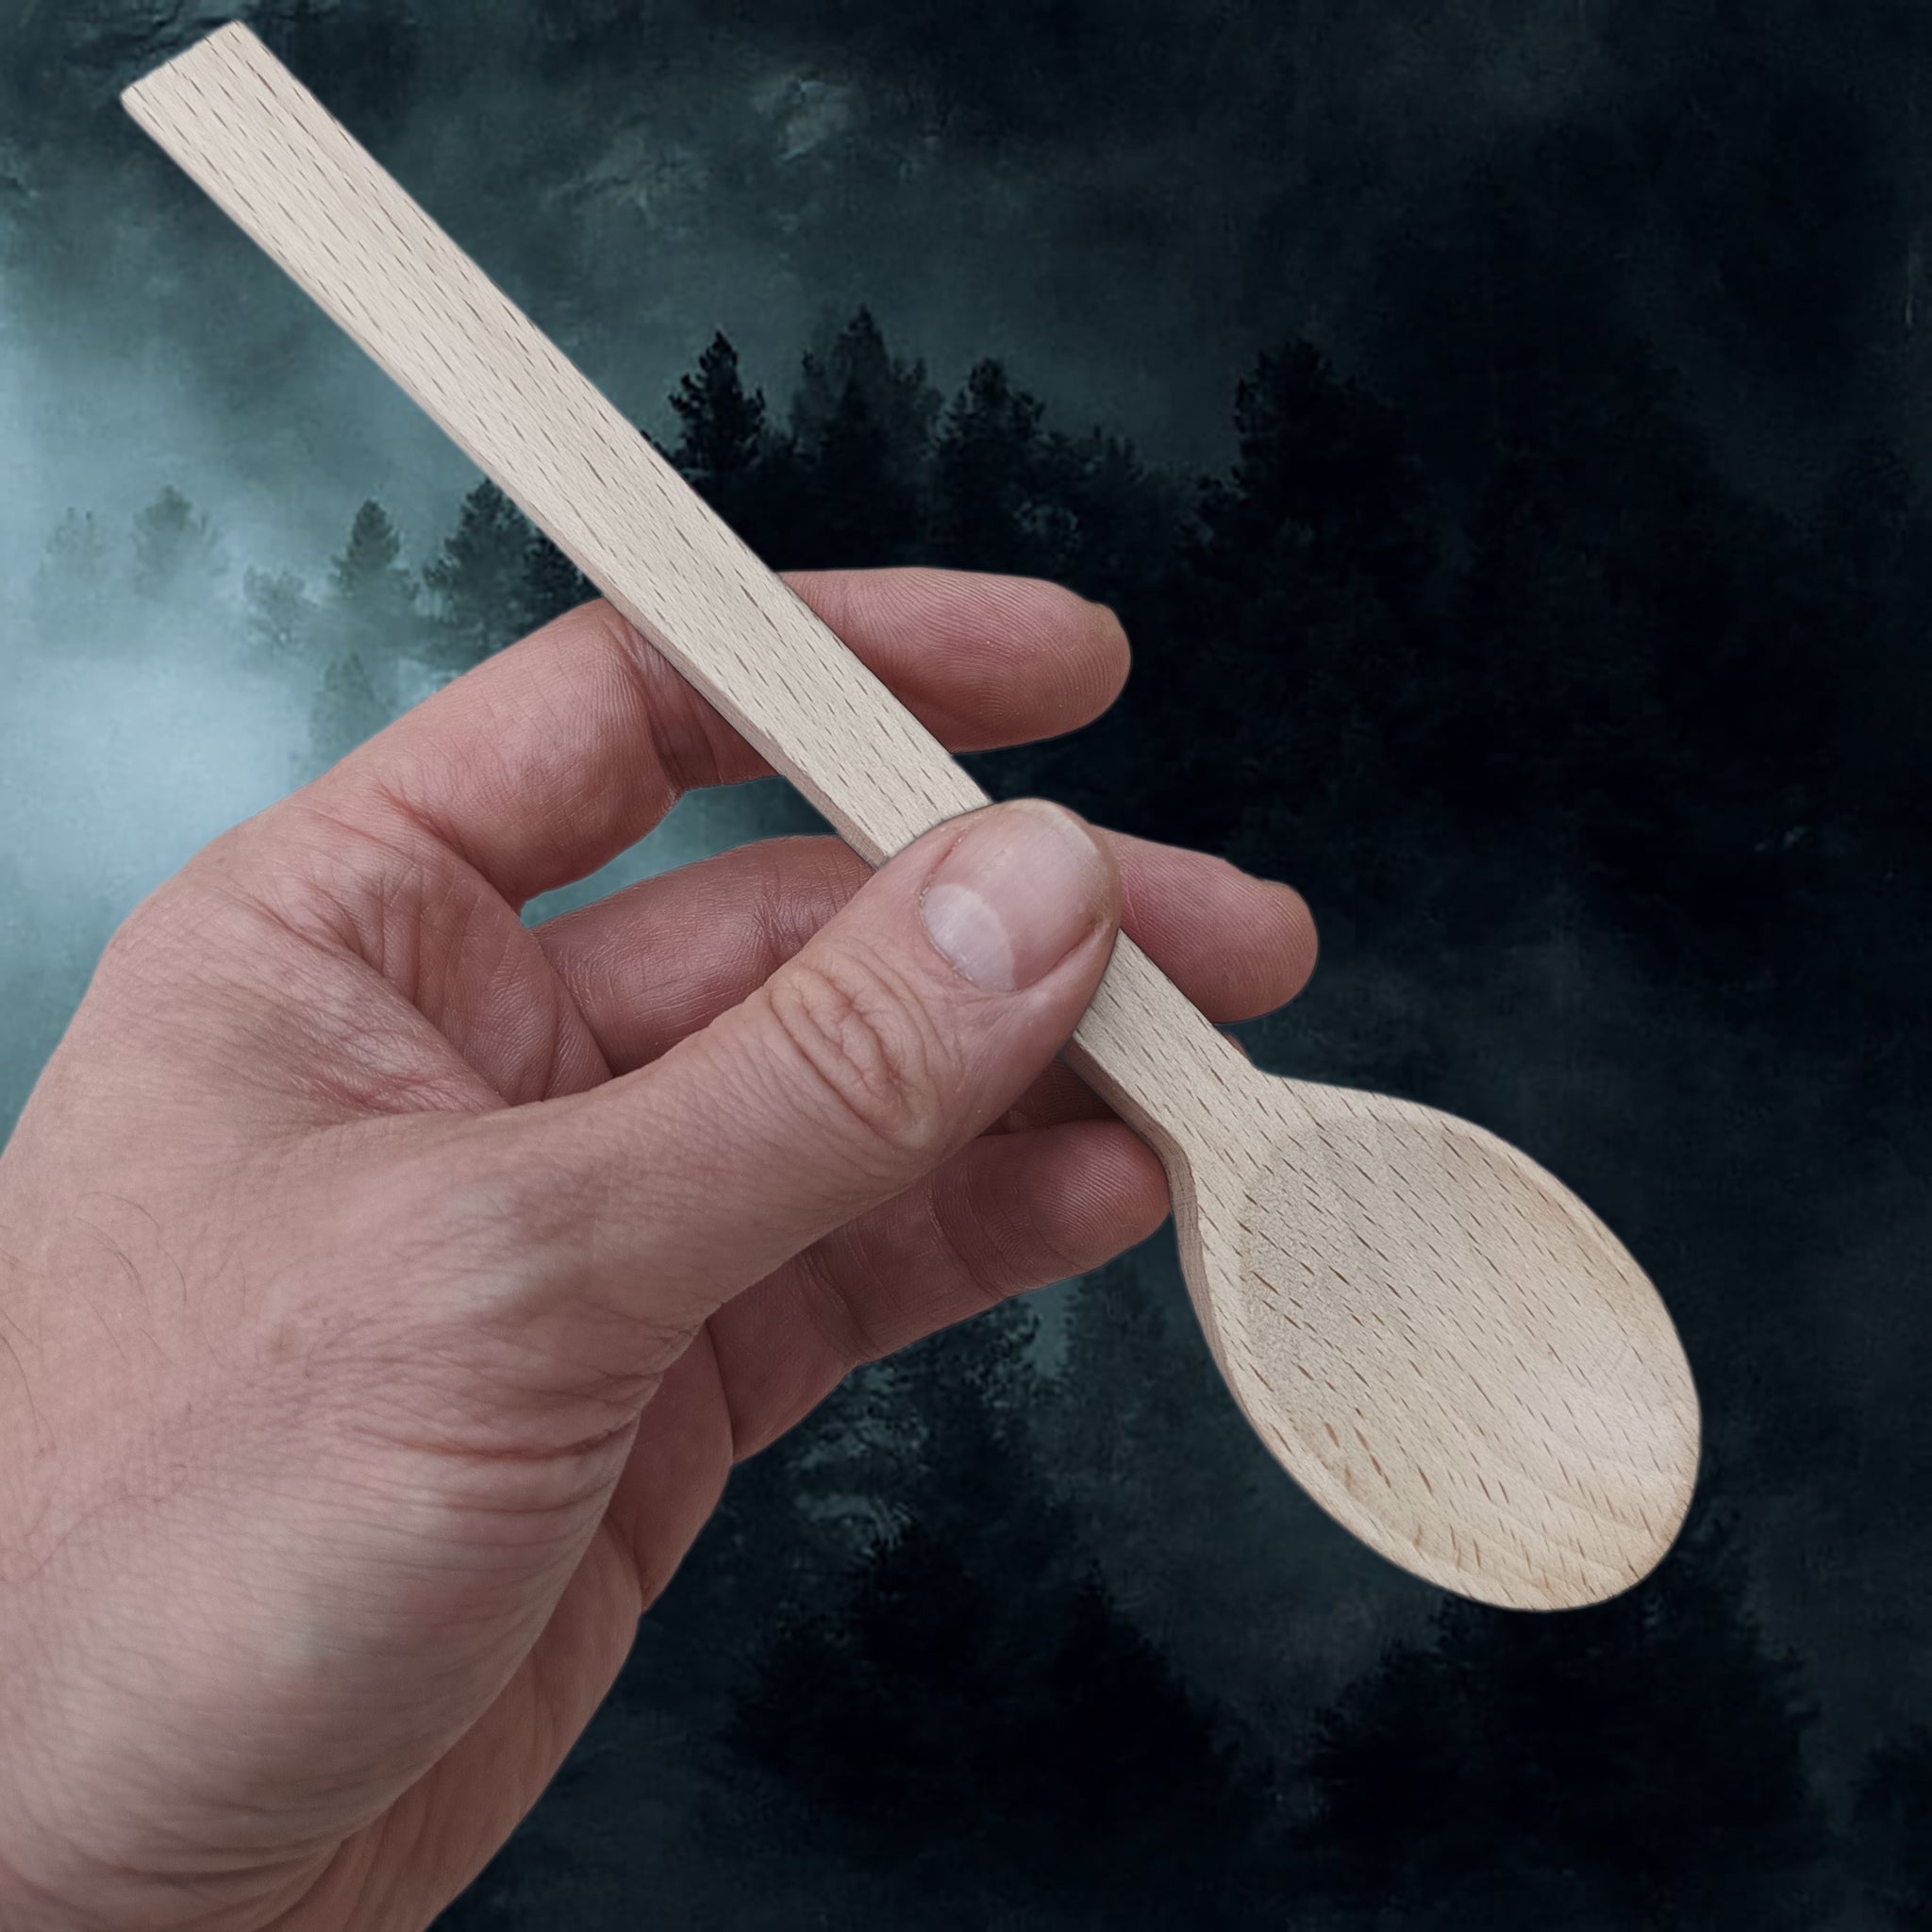 Large Wooden Viking / Medieval Spoon in Hand - Full View